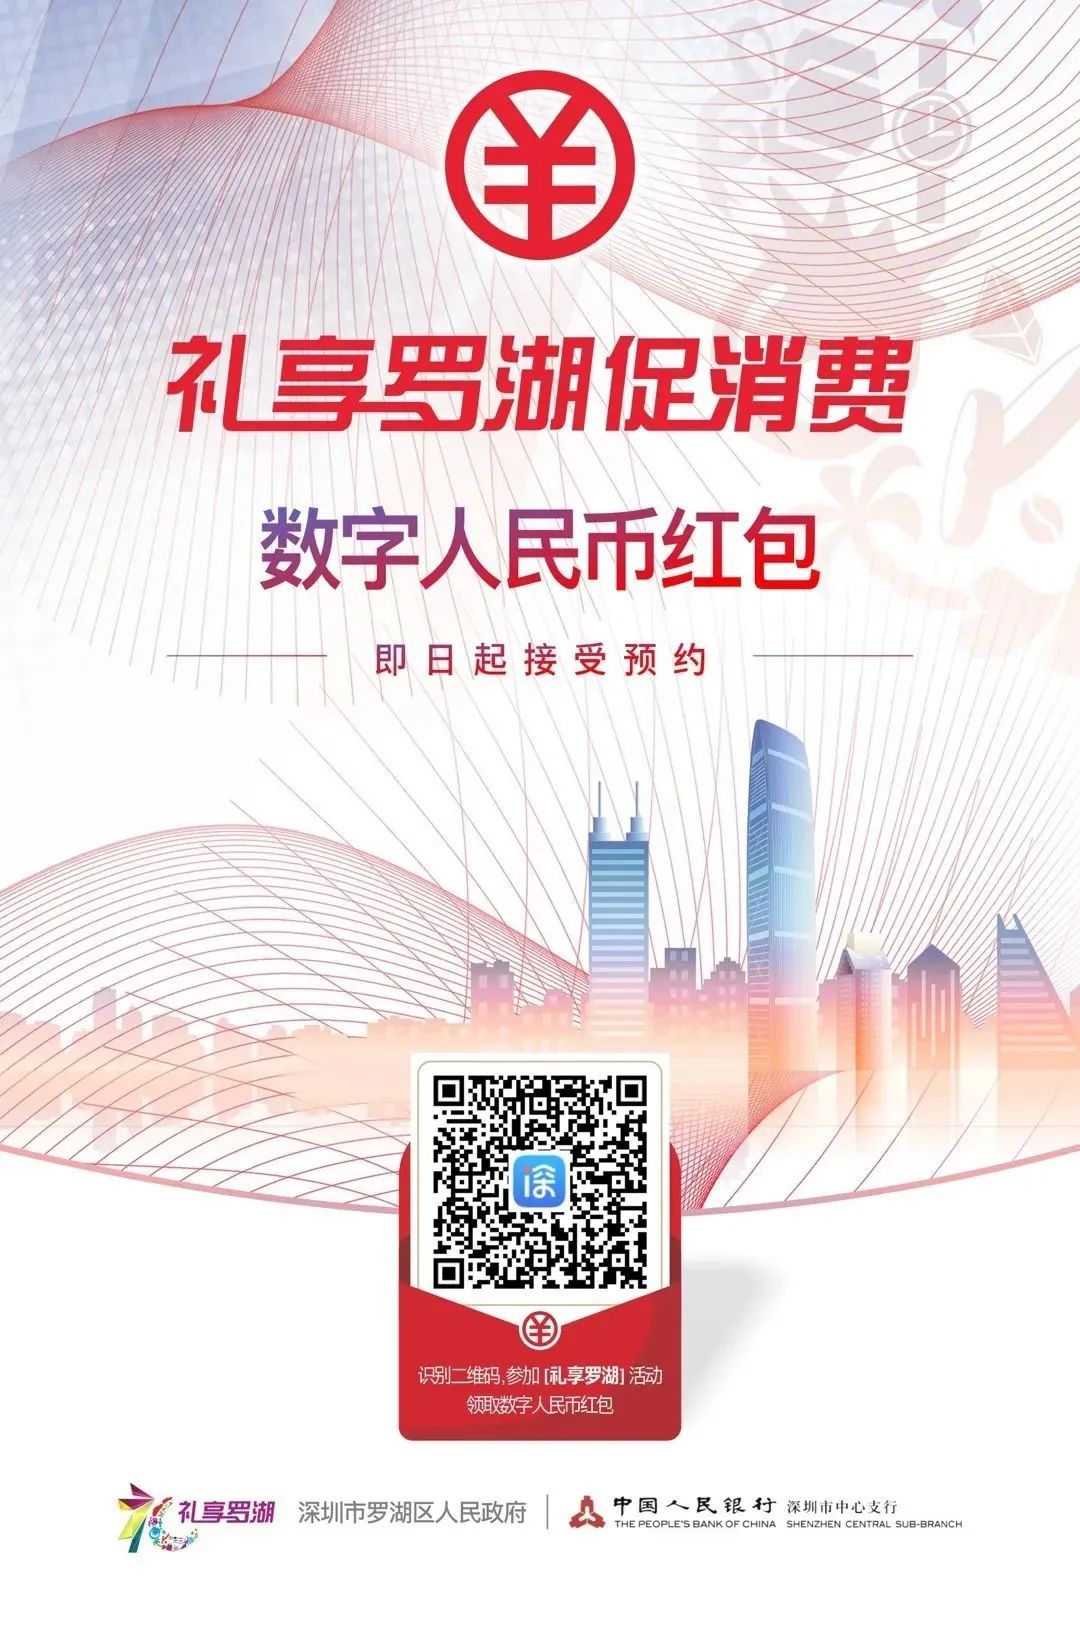 digital rmb is coming! shenzhen trials it with lottery